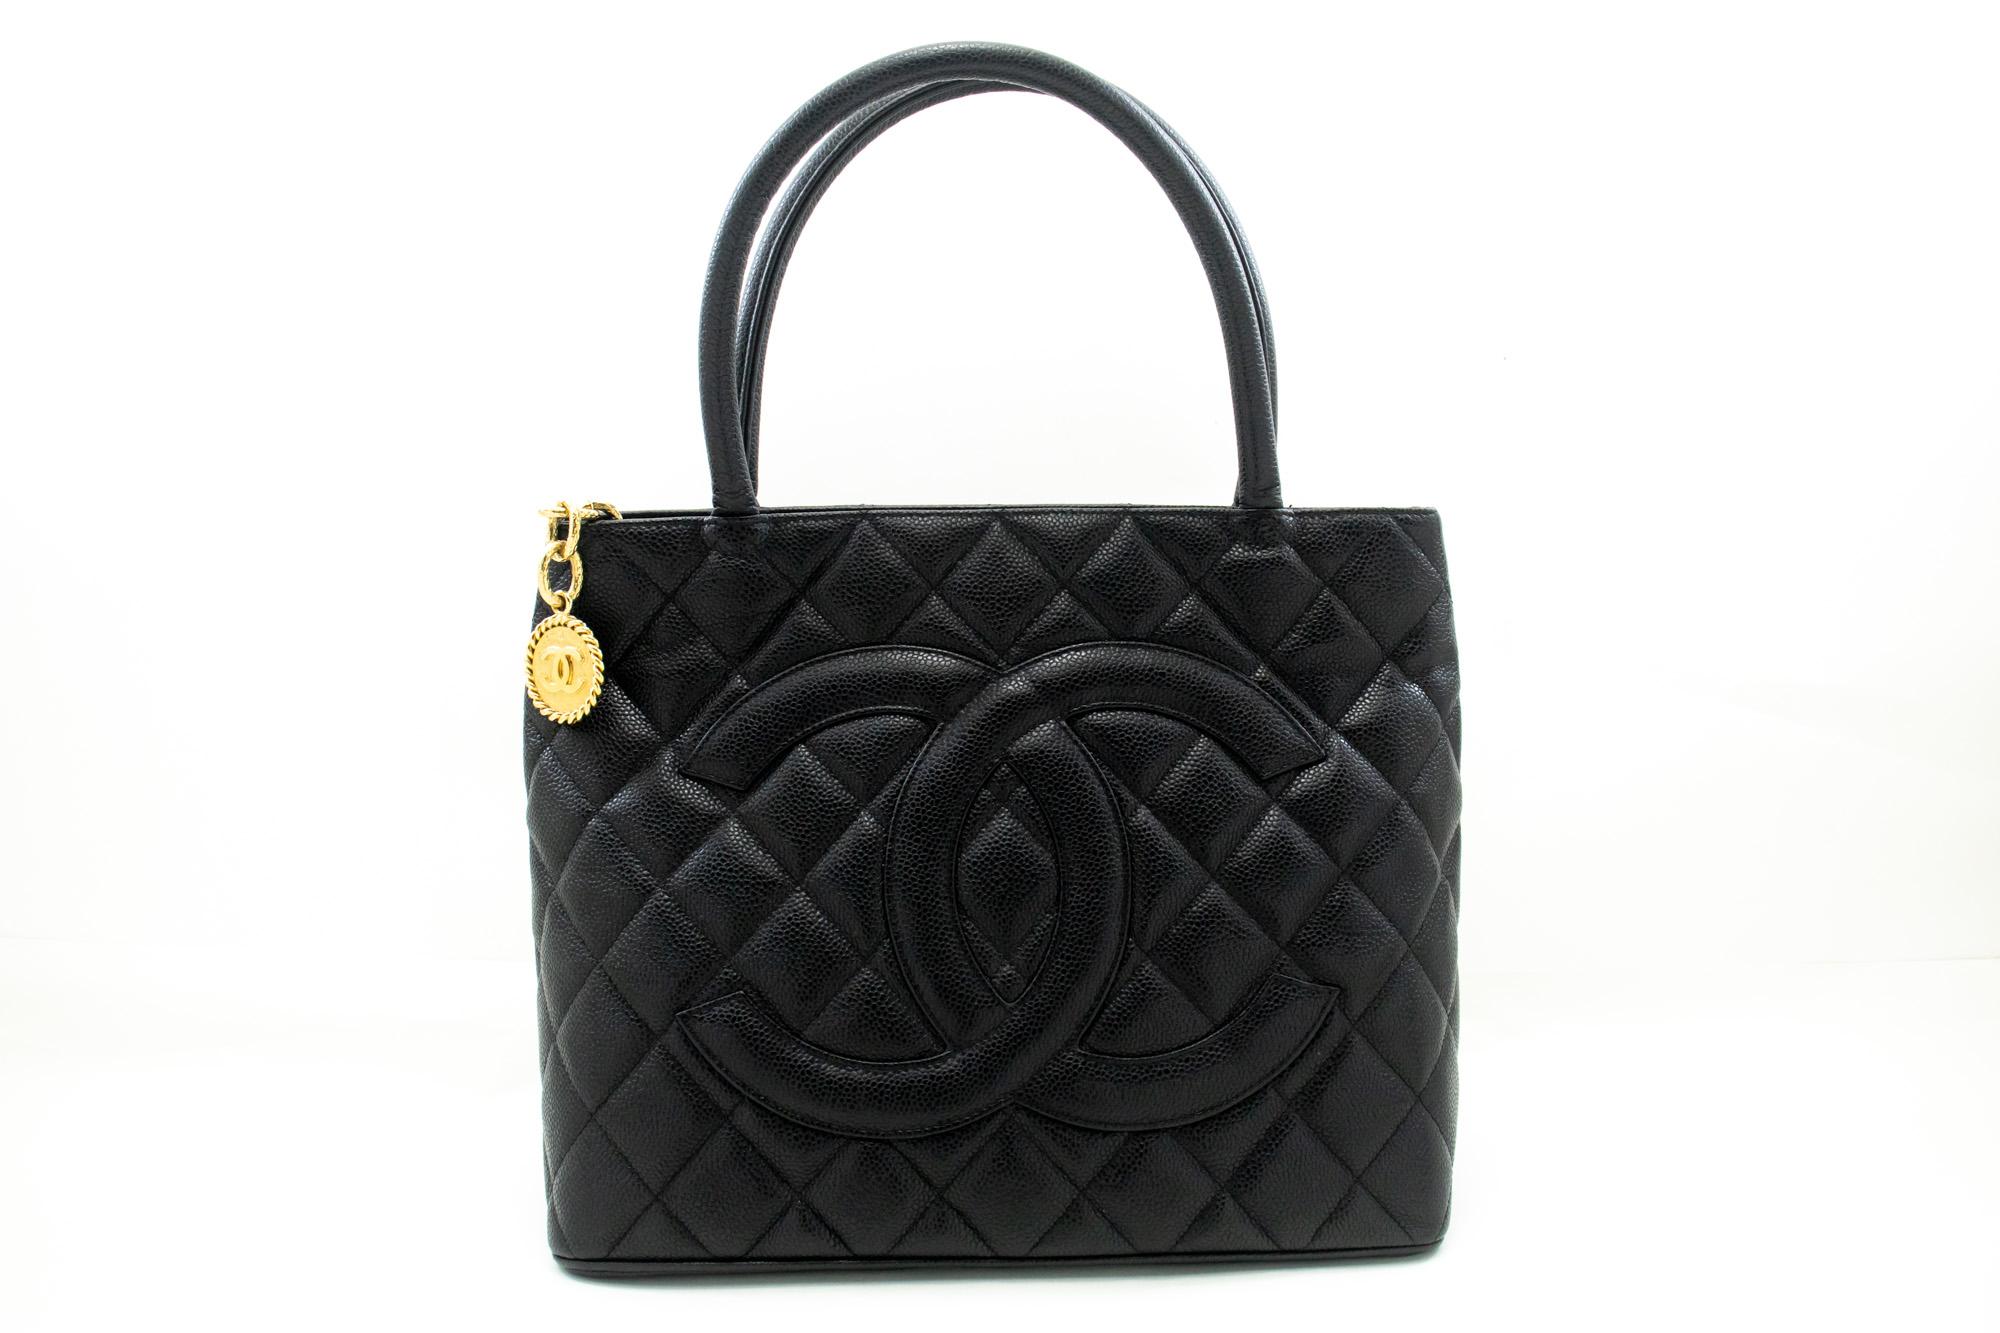 An authentic CHANEL Gold Medallion Caviar Shoulder Bag Grand Shopping Tote. The color is Black. The outside material is Leather. The pattern is Solid. This item is Contemporary. The year of manufacture would be 2008.
Conditions & Ratings
Outside